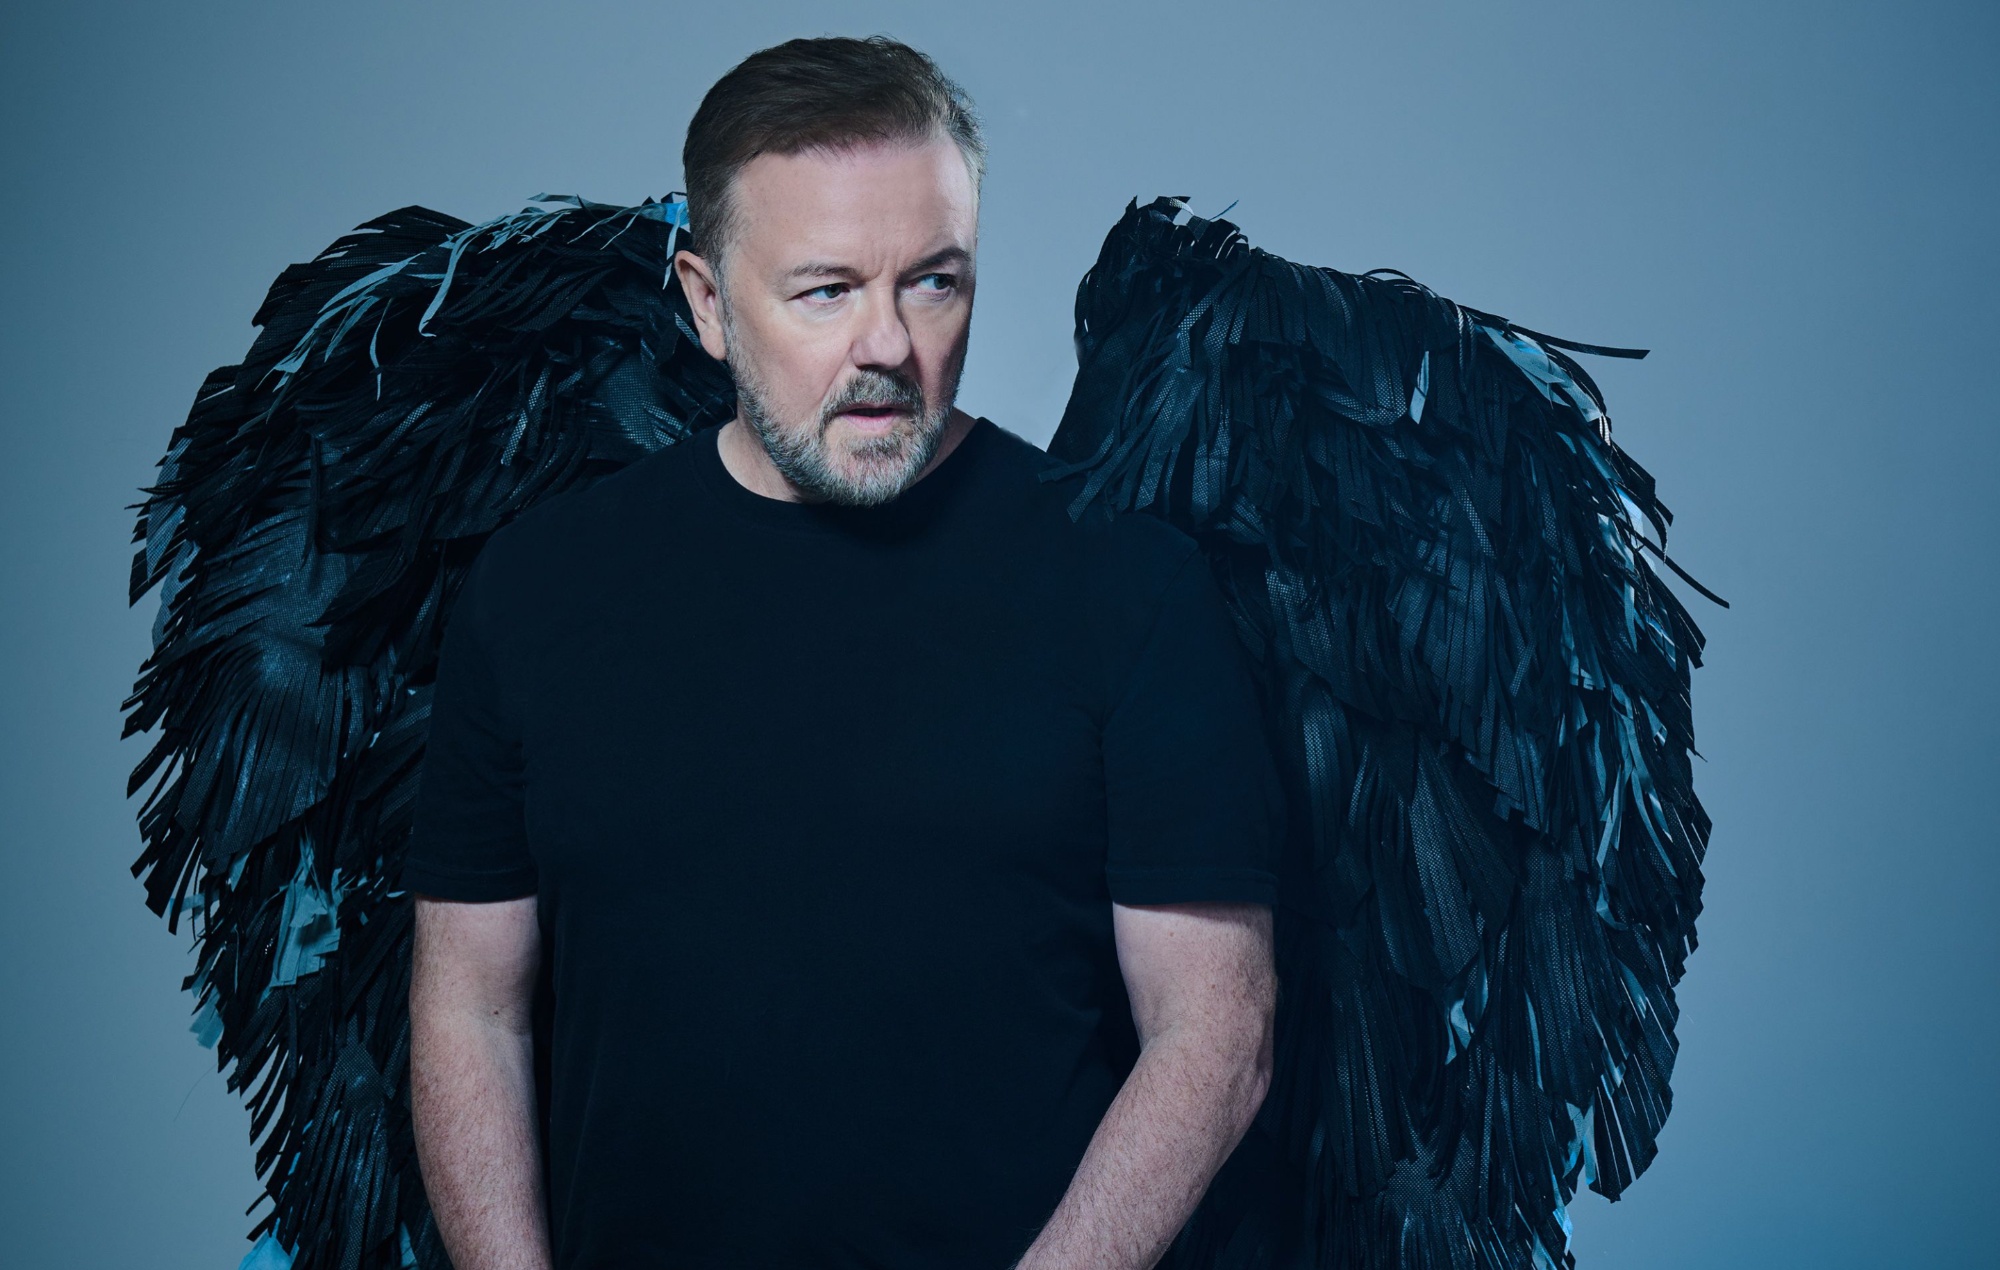 Ricky Gervais announces new world tour and Netflix special ‘Mortality’